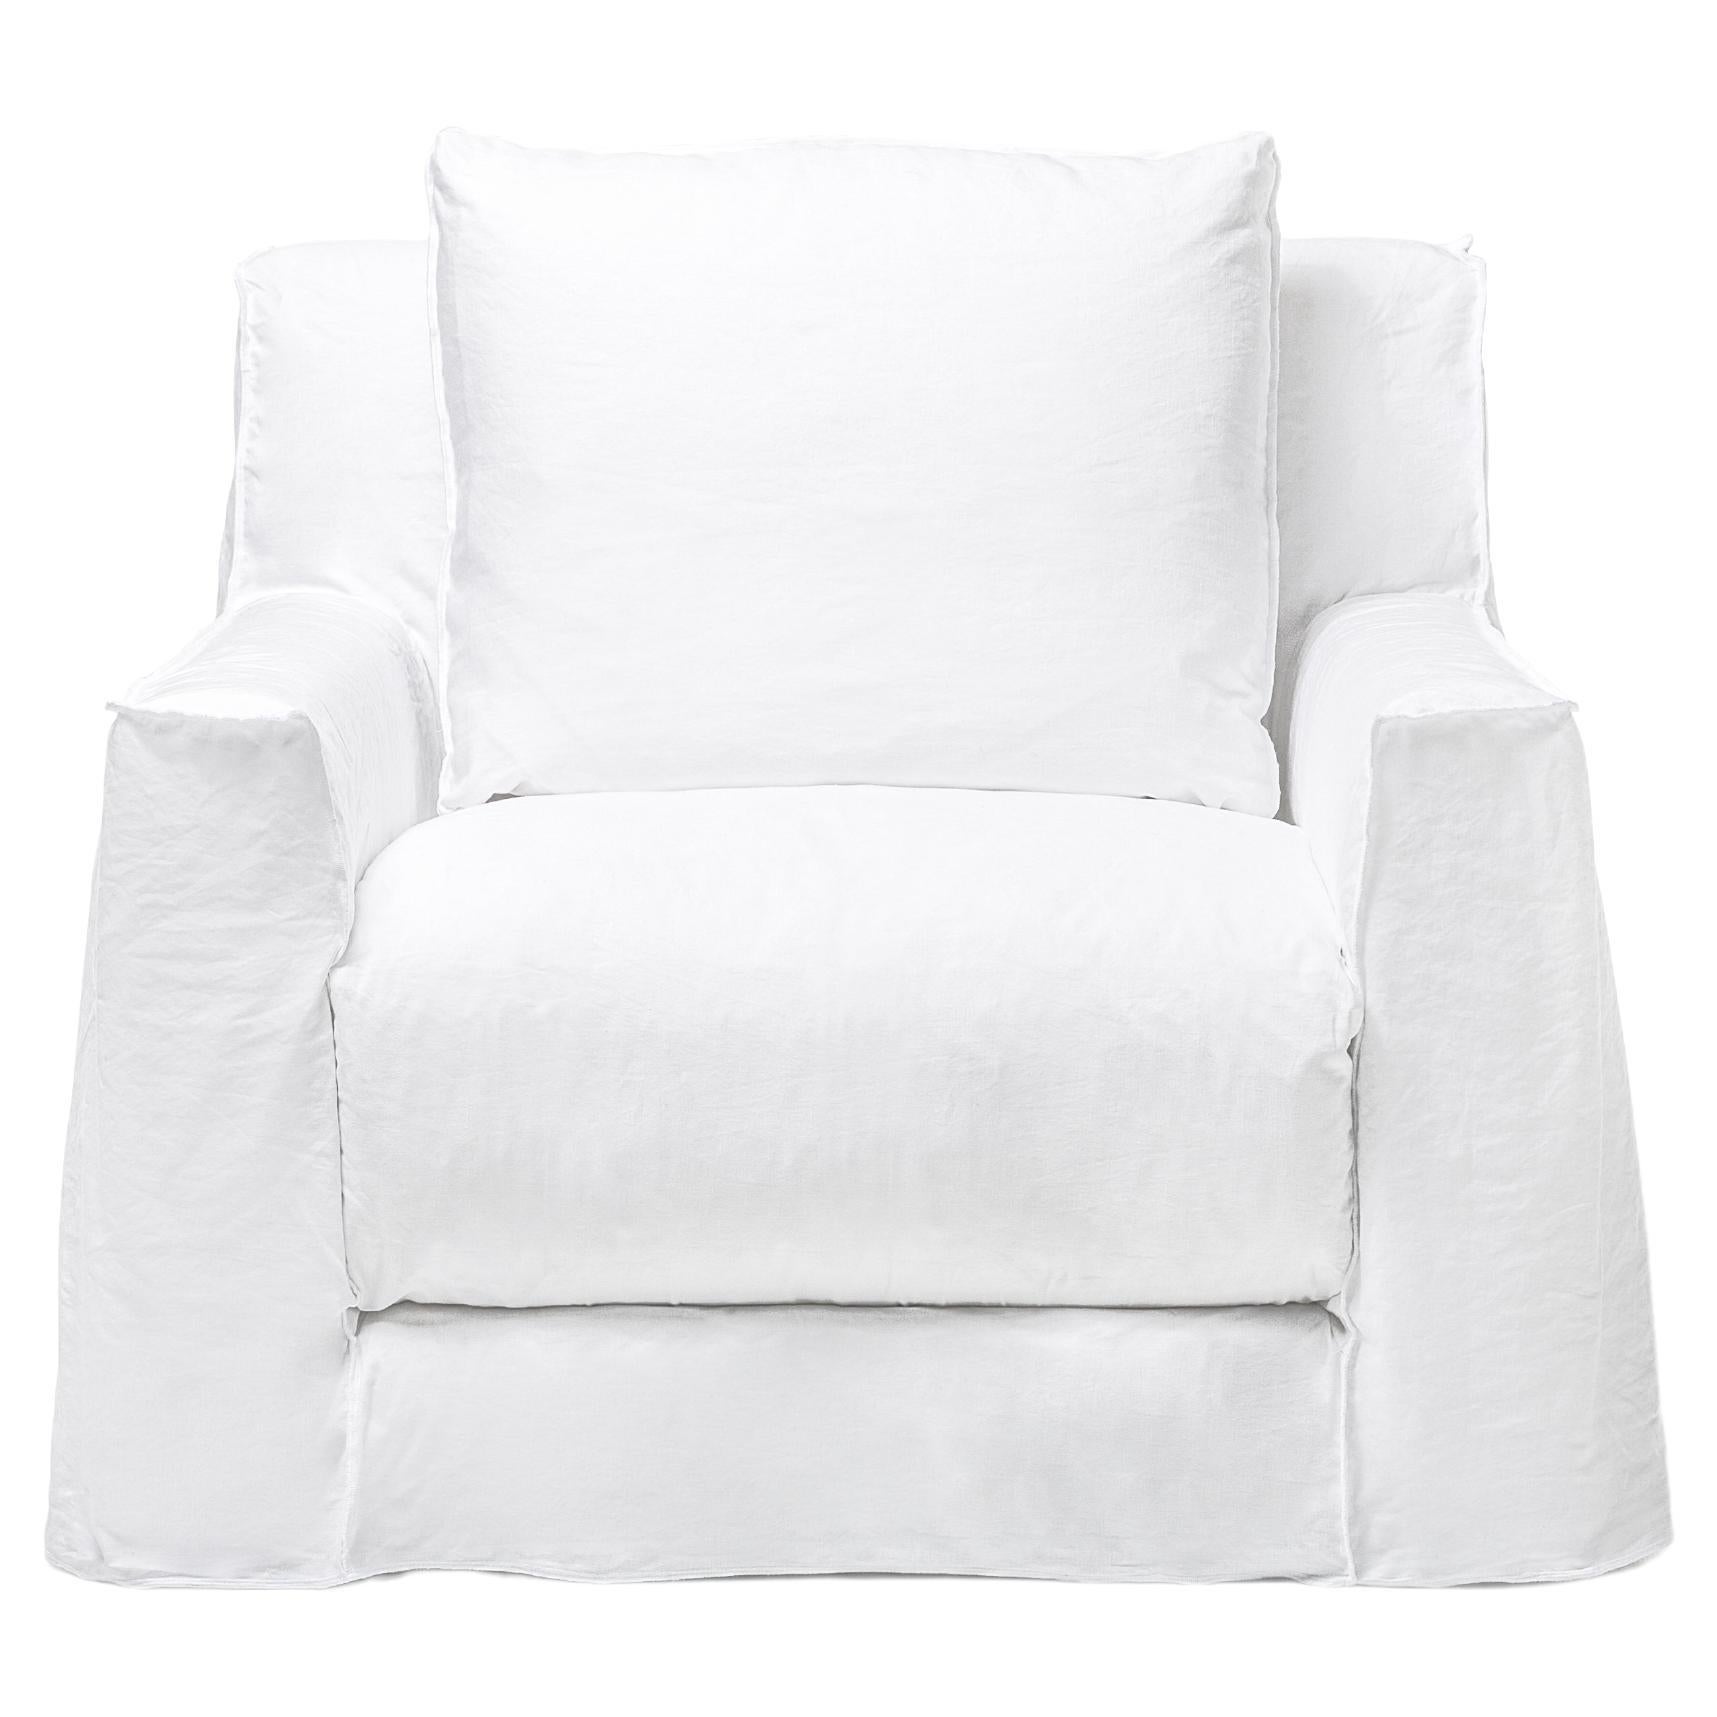 Gervasoni Loll 01 Armchair in White Linen Upholstery by Paola Navone For Sale